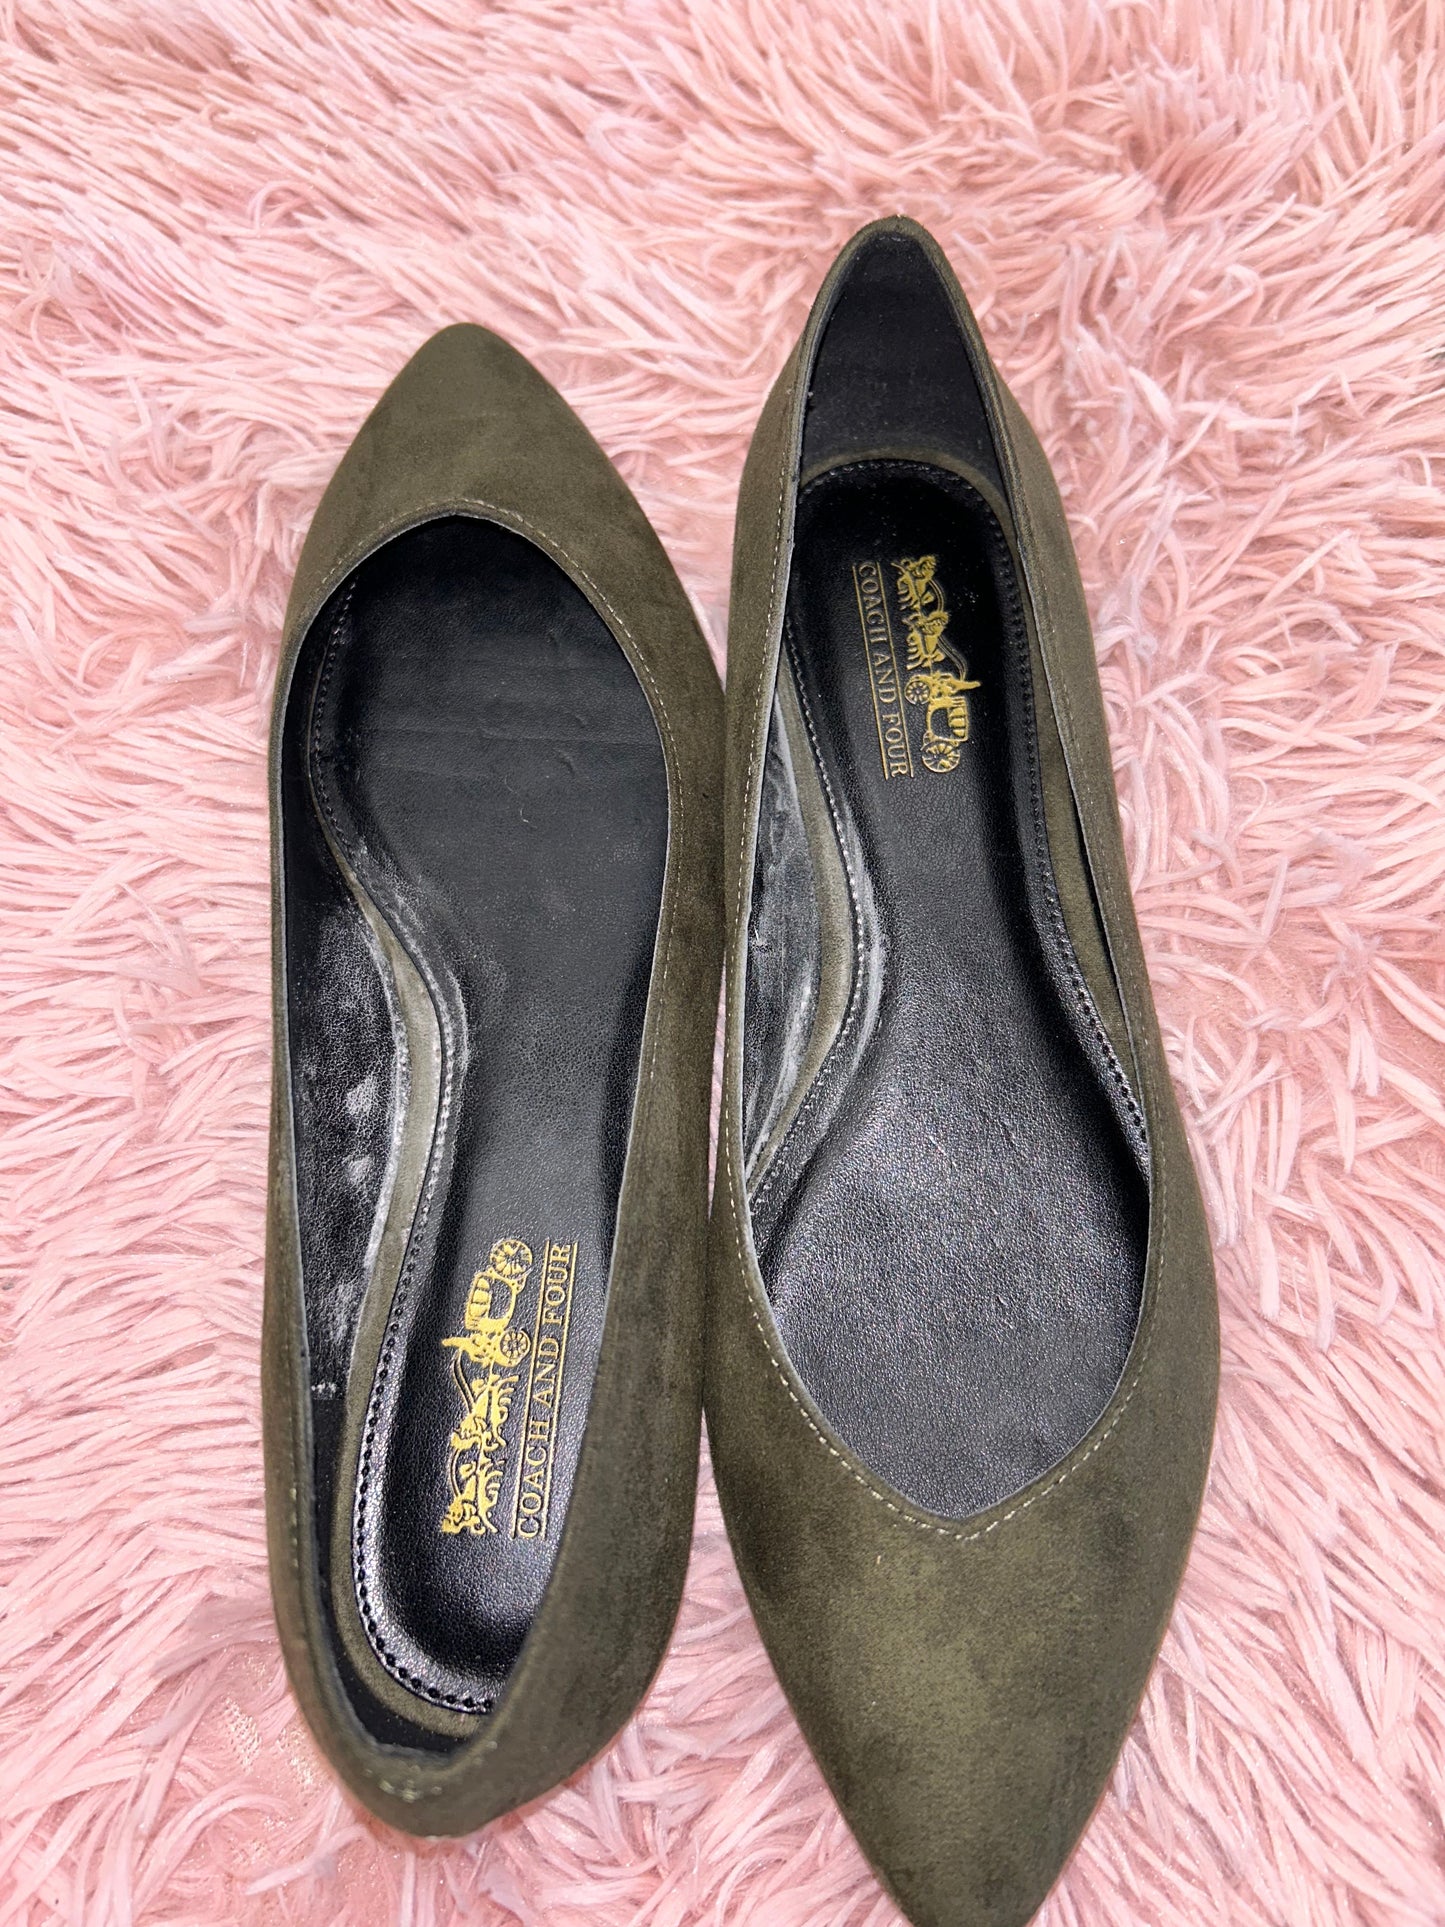 Olive Shoes Flats Ballet Coach And Four, Size 6.5